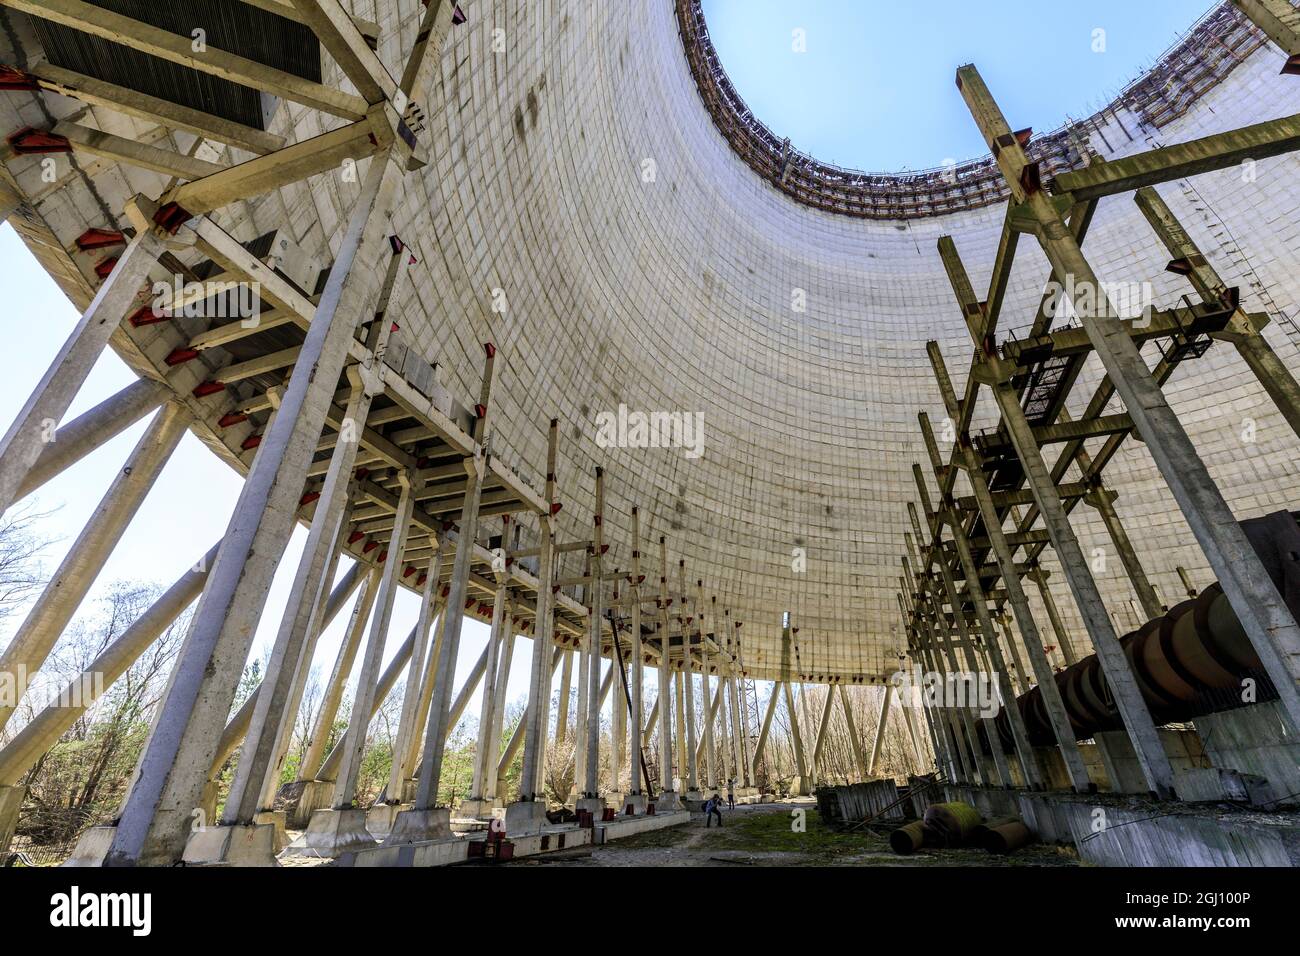 Ukraine, Pripyat, Chernobyl. Inside the unfinished cooling tower for reactors 5 and 6 which were never completed. Stock Photo